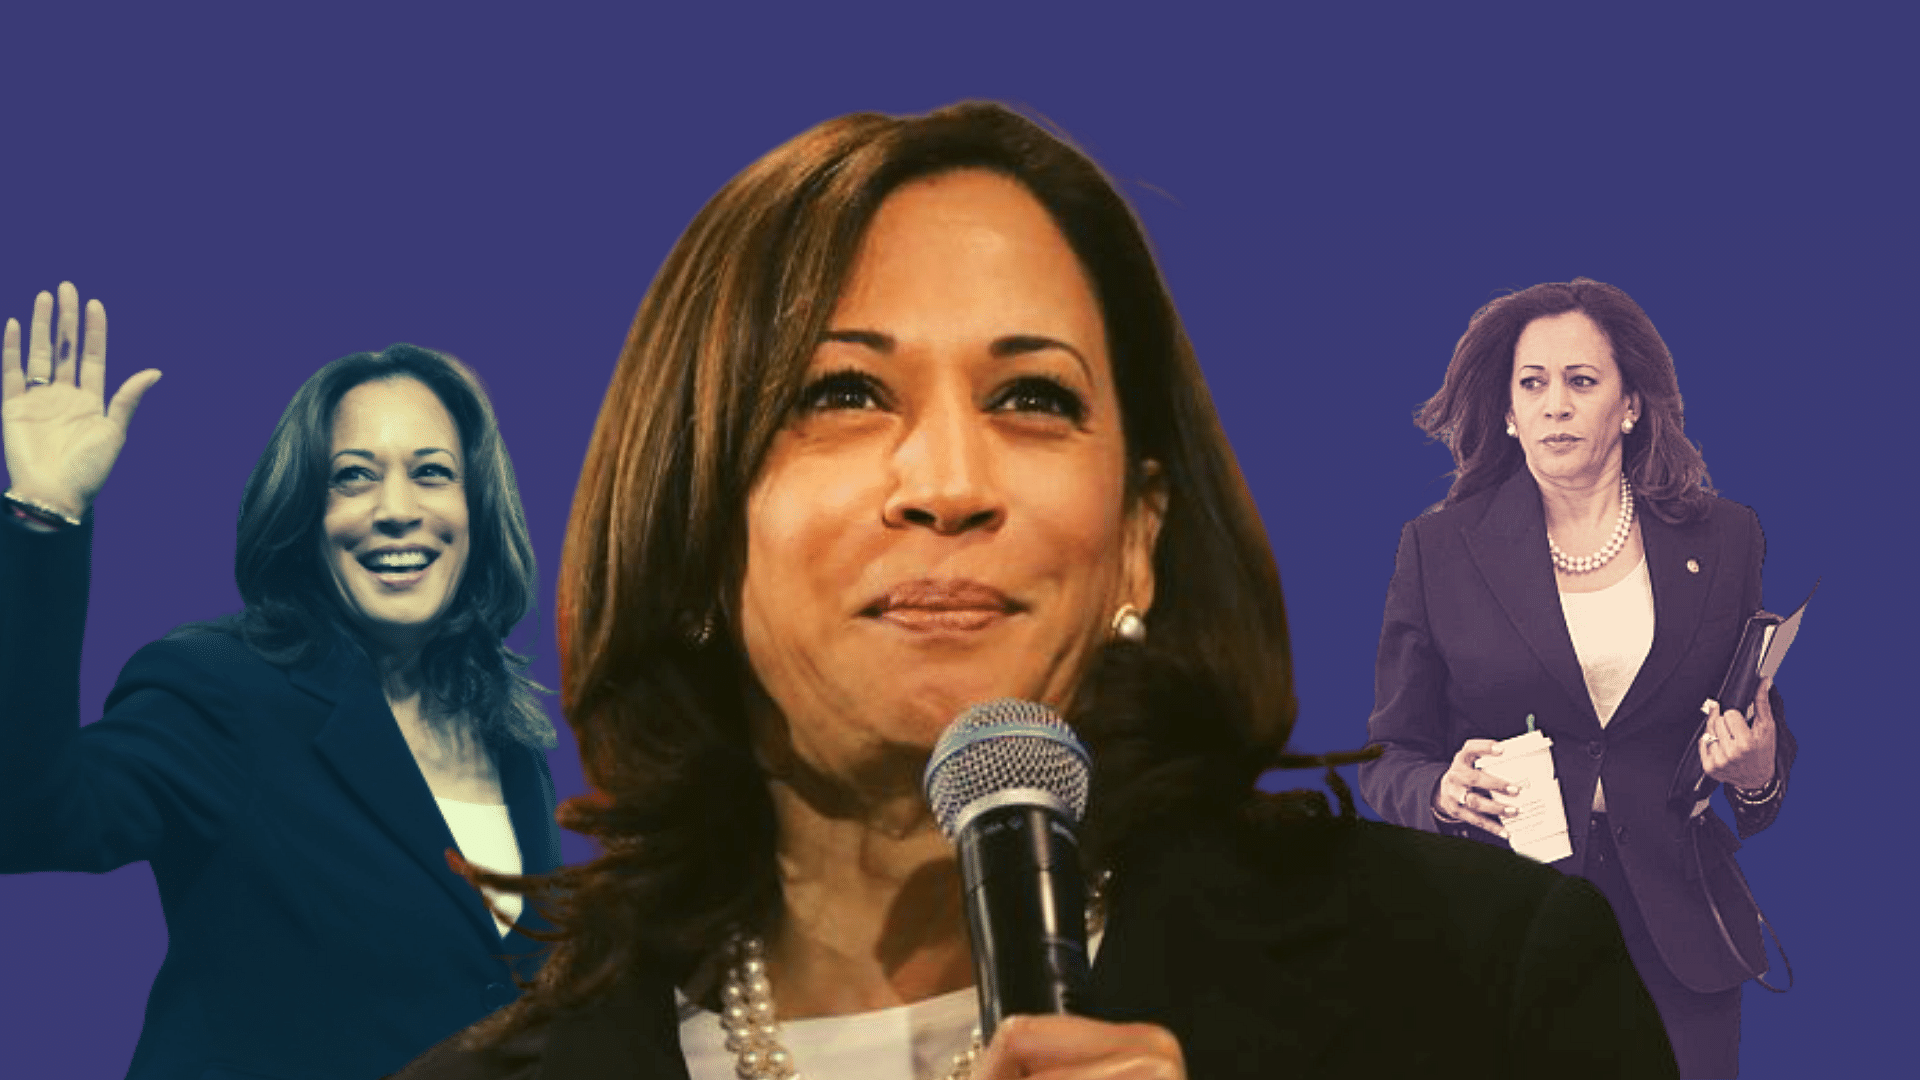 Kamala Harris was chosen by Joe Biden as his running mate and vice presidential candidate for the upcoming US elections. 